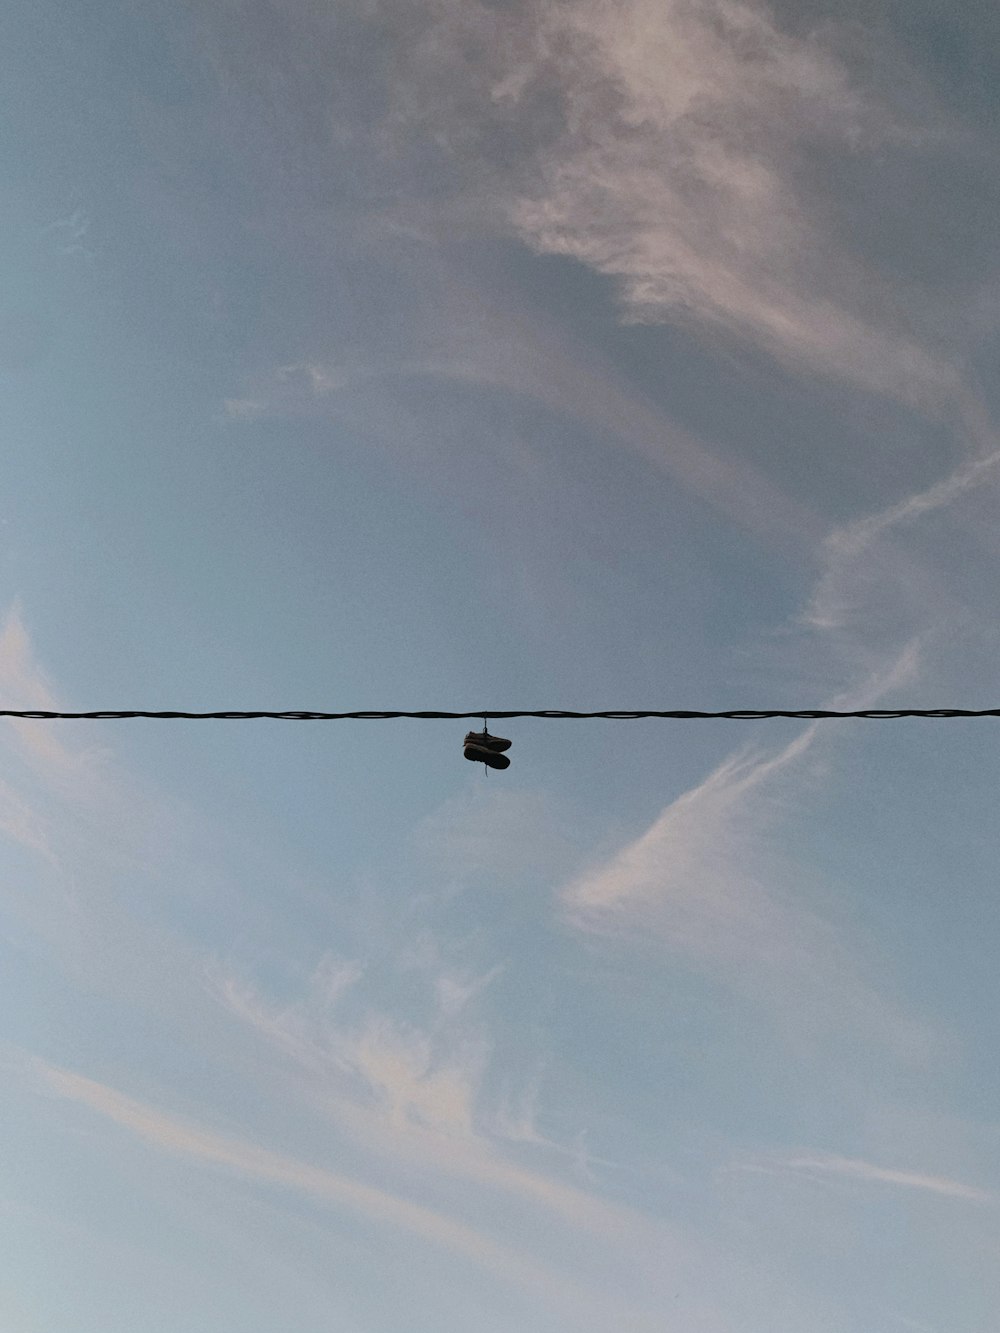 a bird sitting on a wire with a sky background